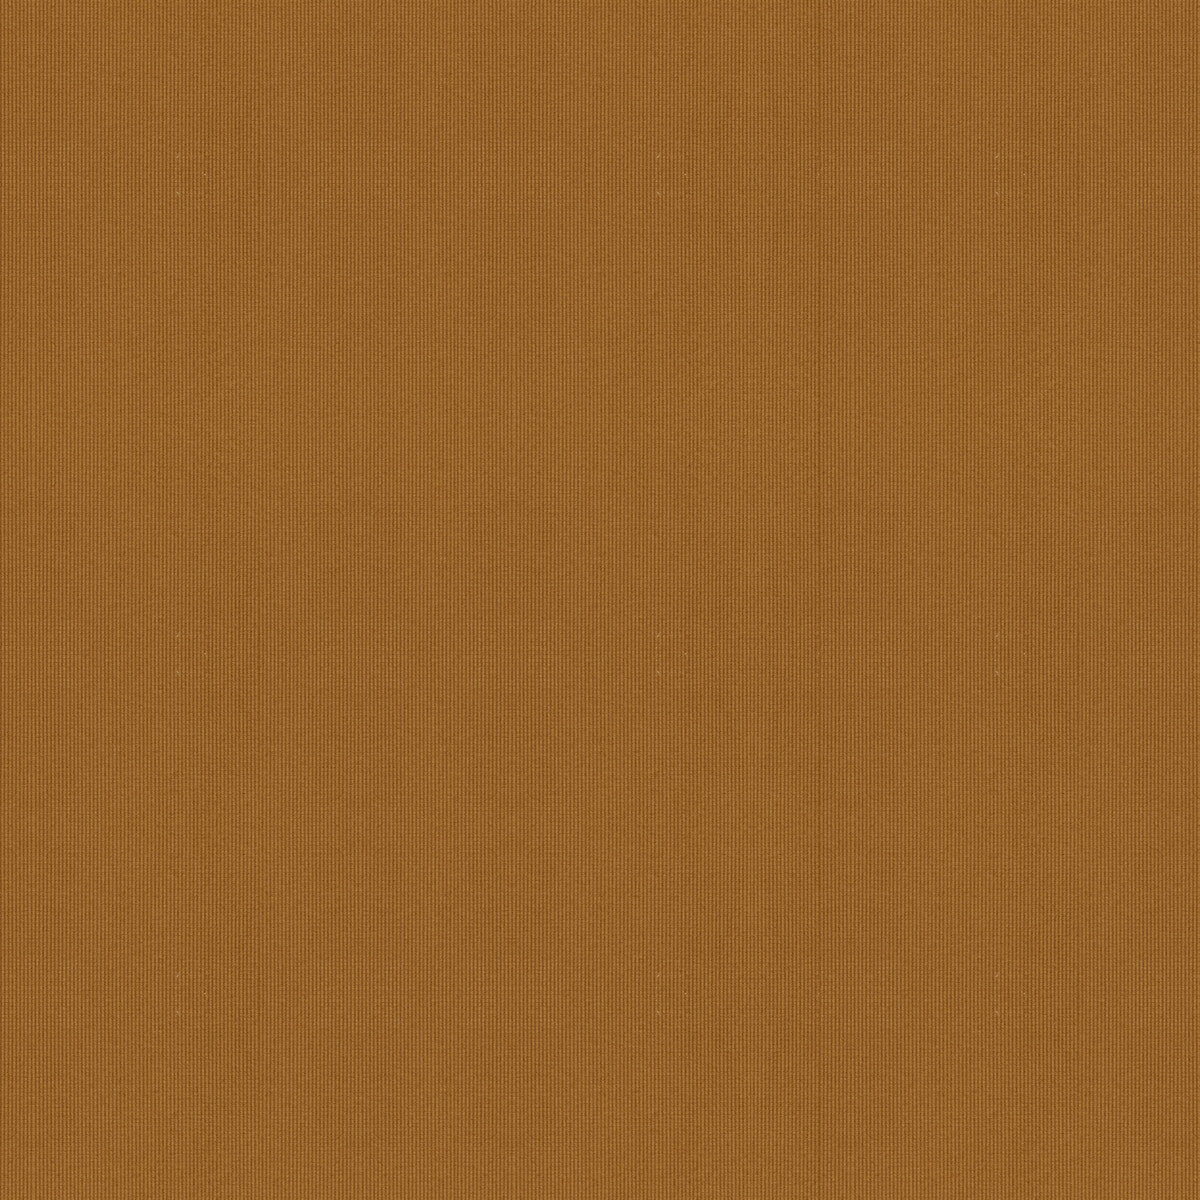 Nimble fabric in caramel color - pattern NIMBLE.1616.0 - by Kravet Couture